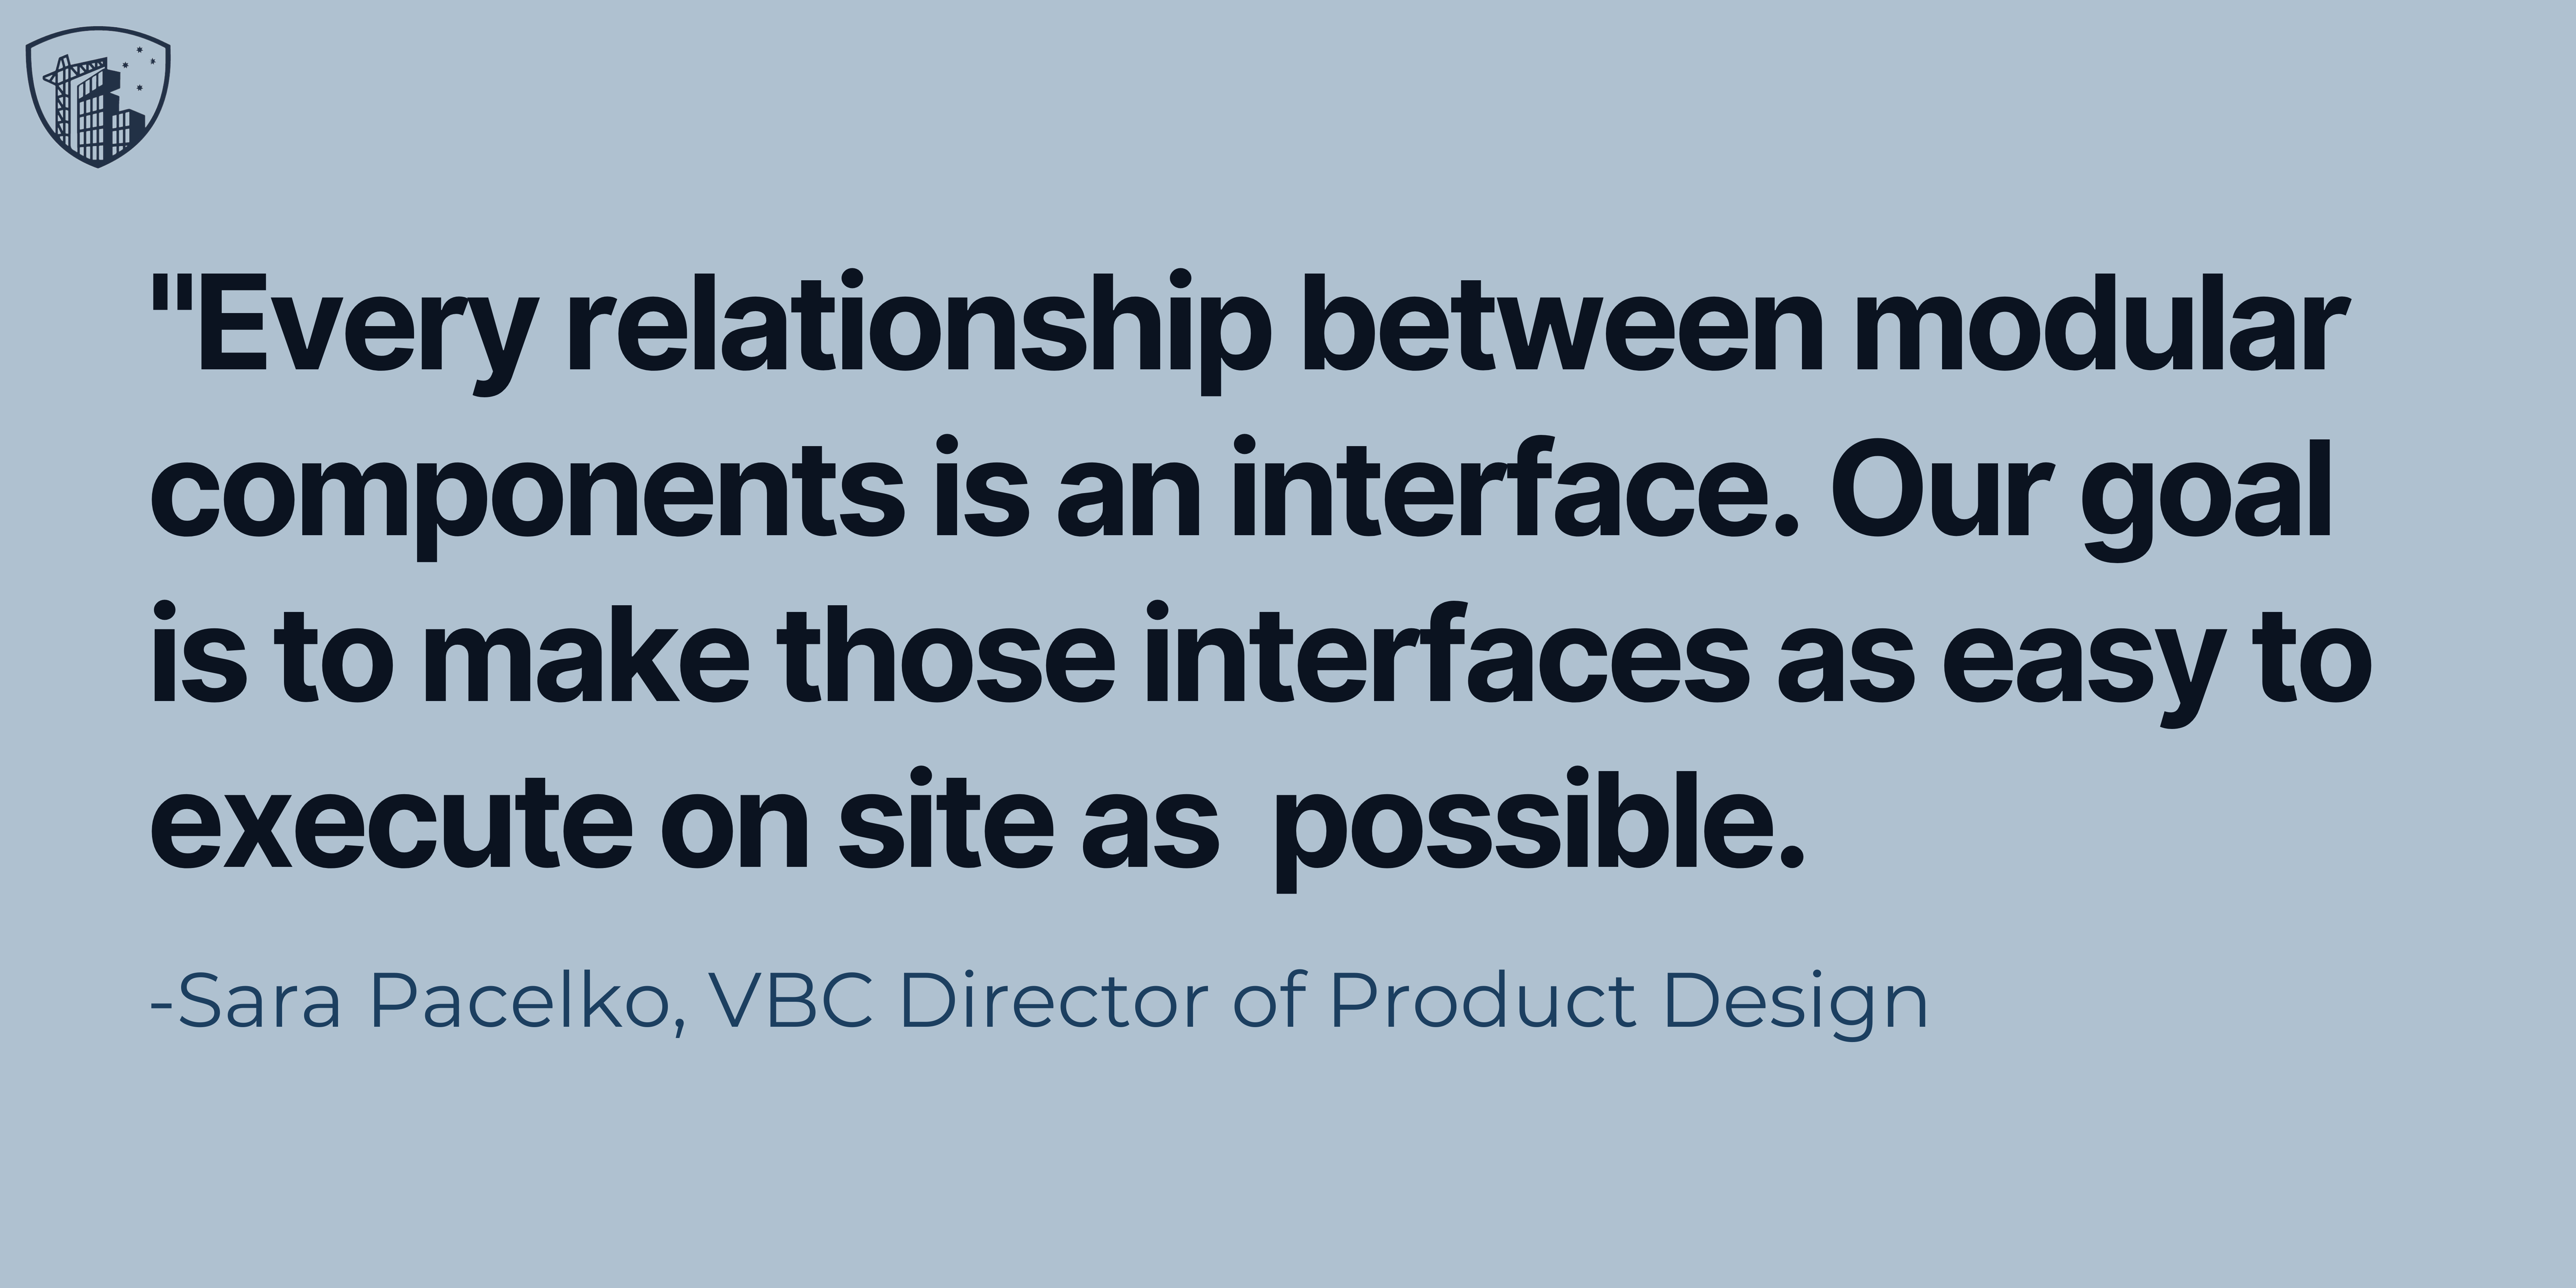 “Every relationship between modular components is an interface. Our goal is to make those interfaces as easy to execute on site as possible.”  